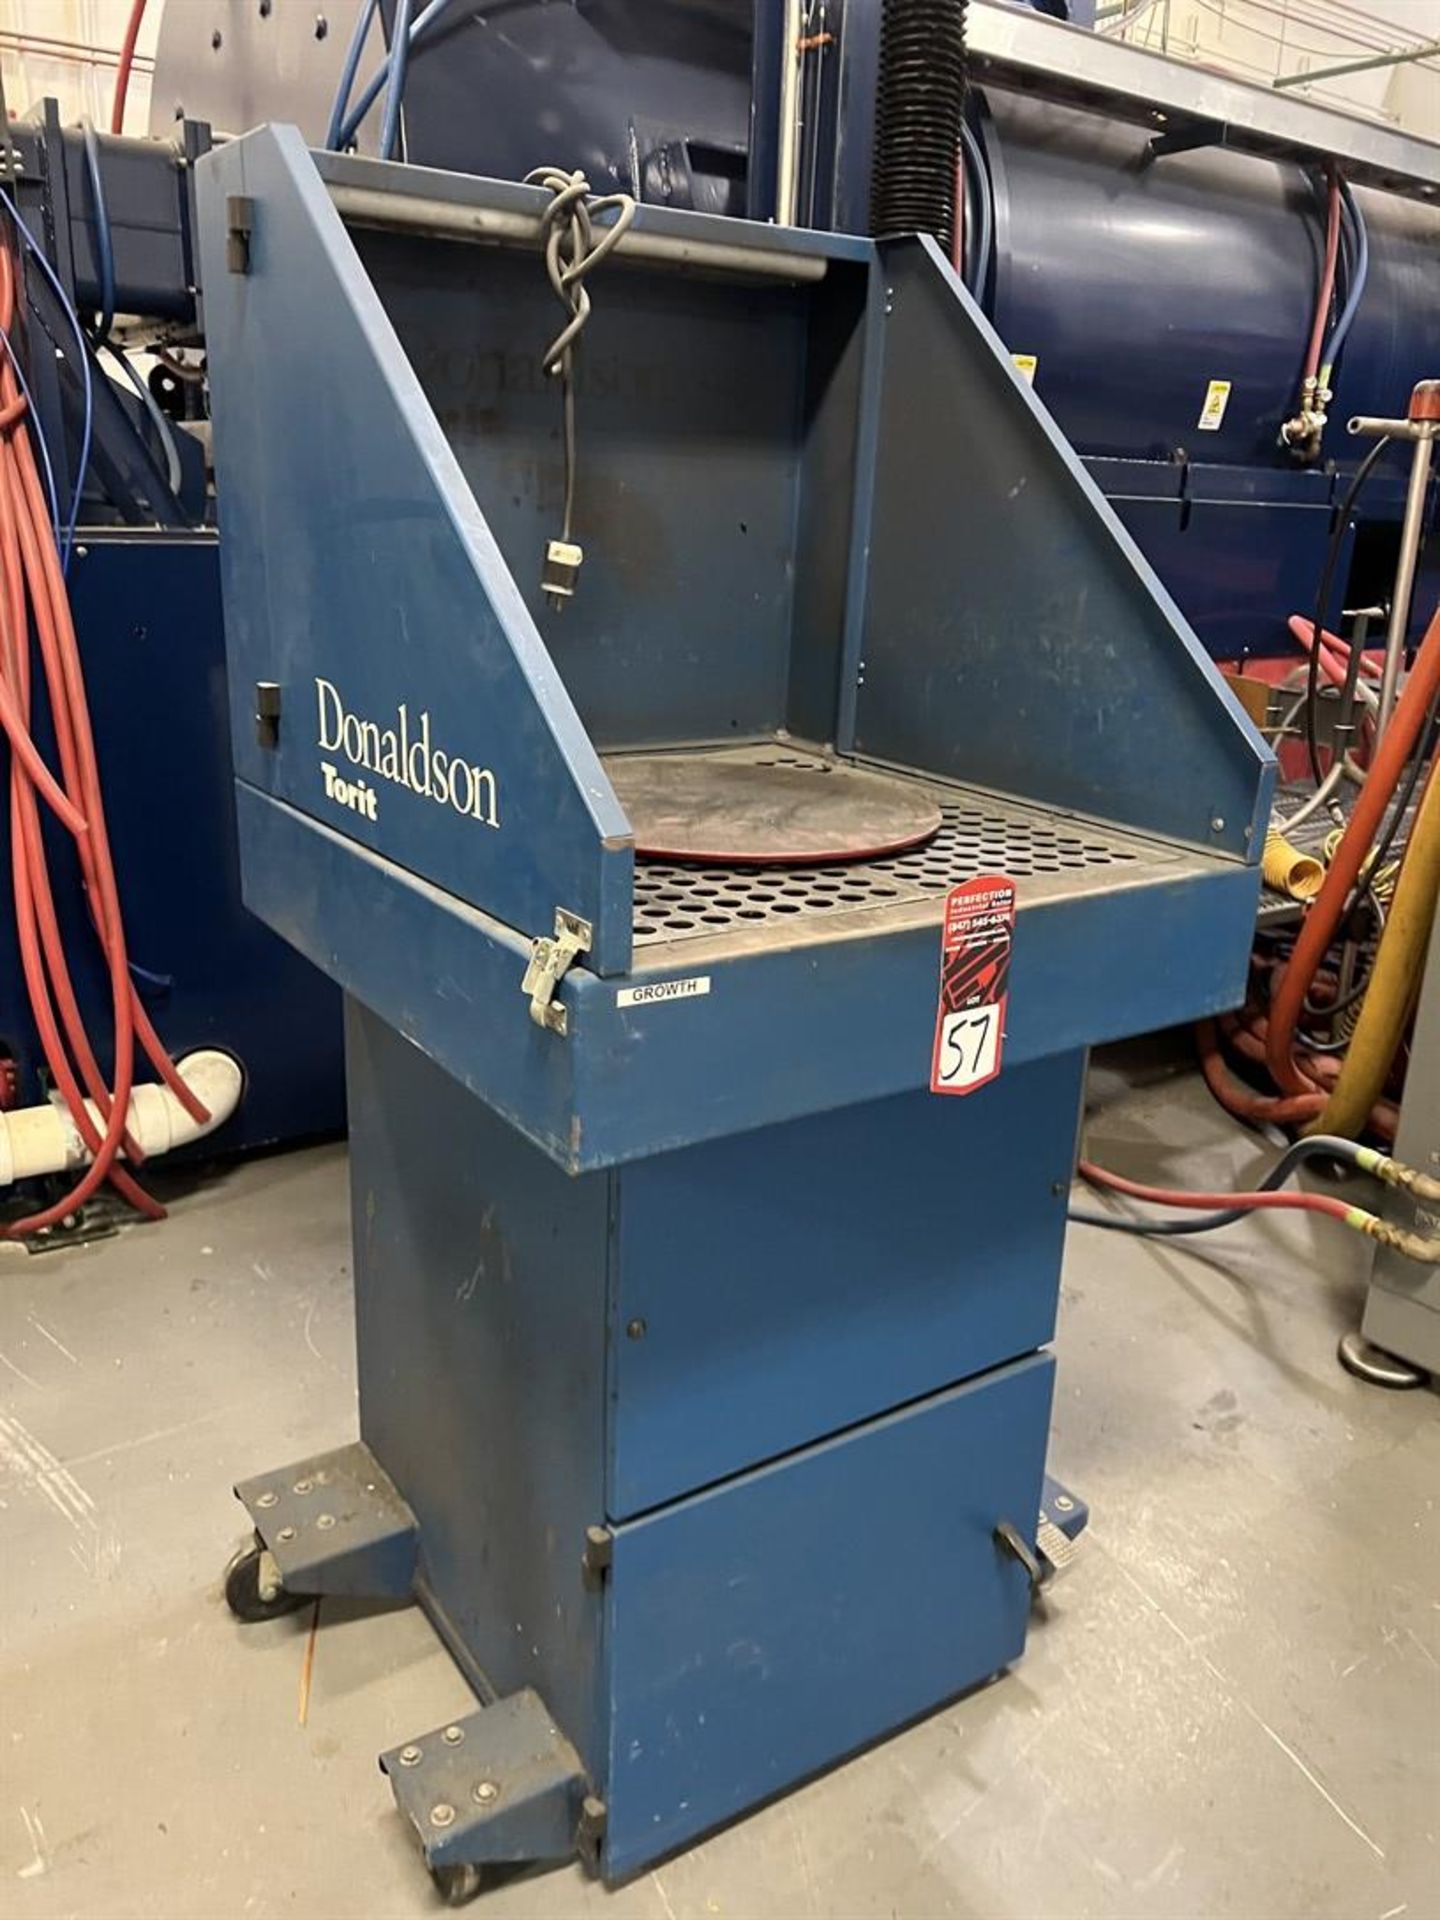 DONALDSON Torit DB-800 Downdraft Table, s/n 2554135, 1.5 HP, 27" x 26" Working Area - Image 2 of 4